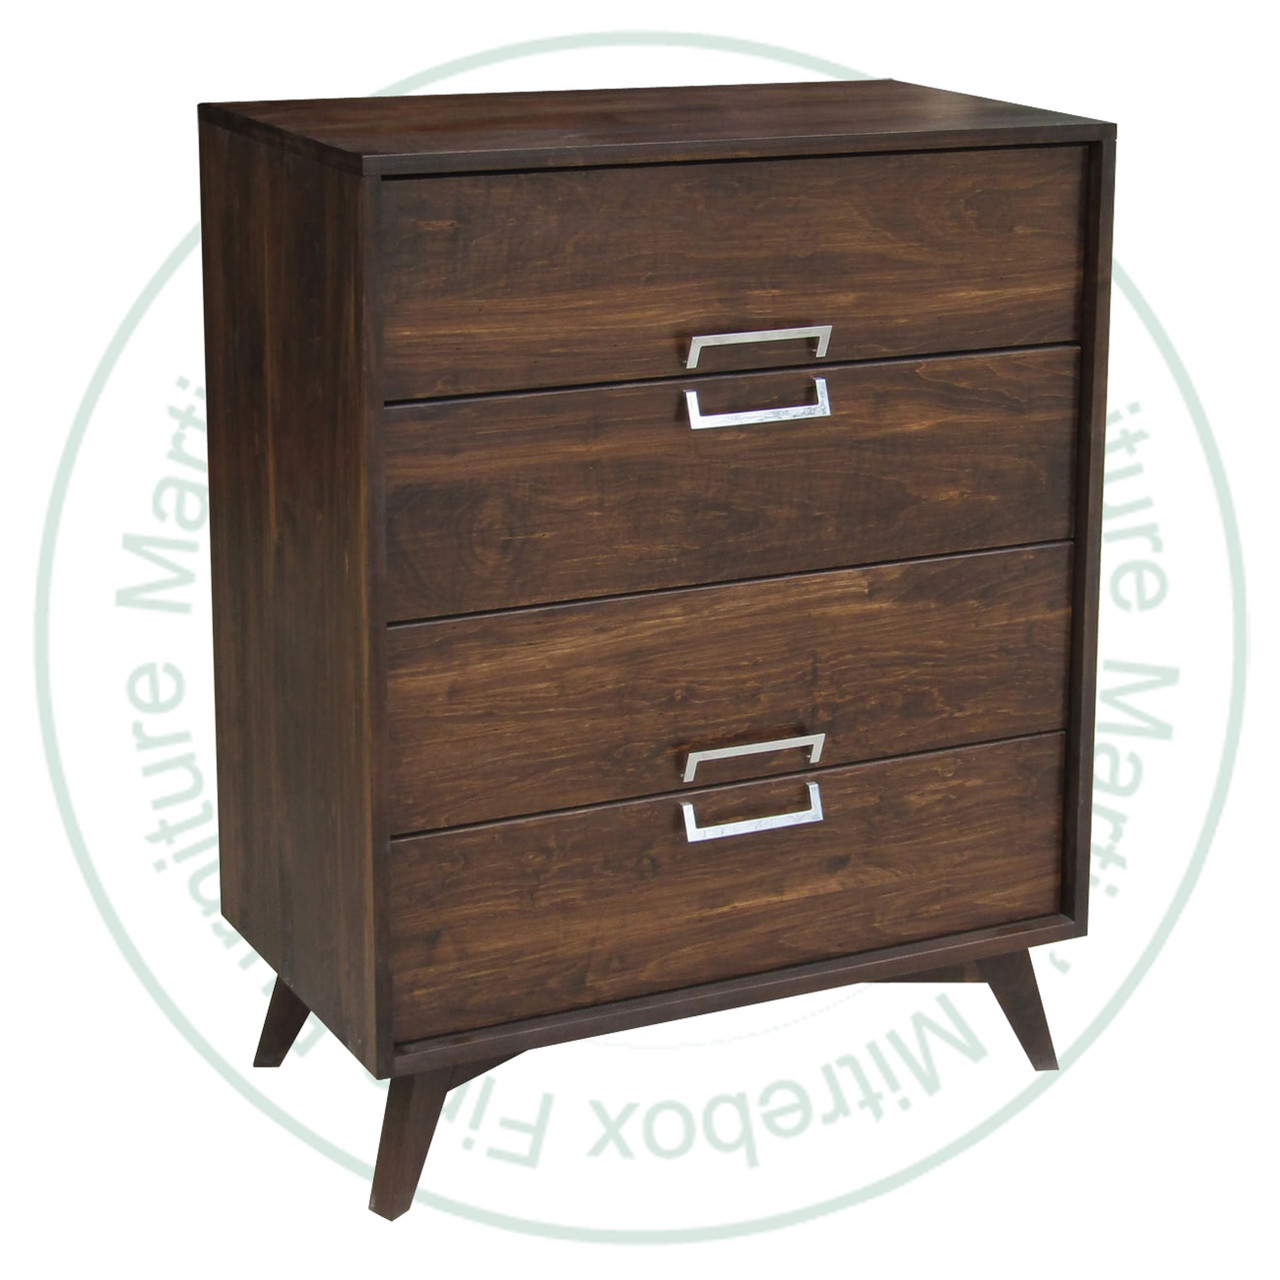 Wormy Maple Avenue Chest Of Drawers 19'' Deep x 36'' Wide x 46'' High